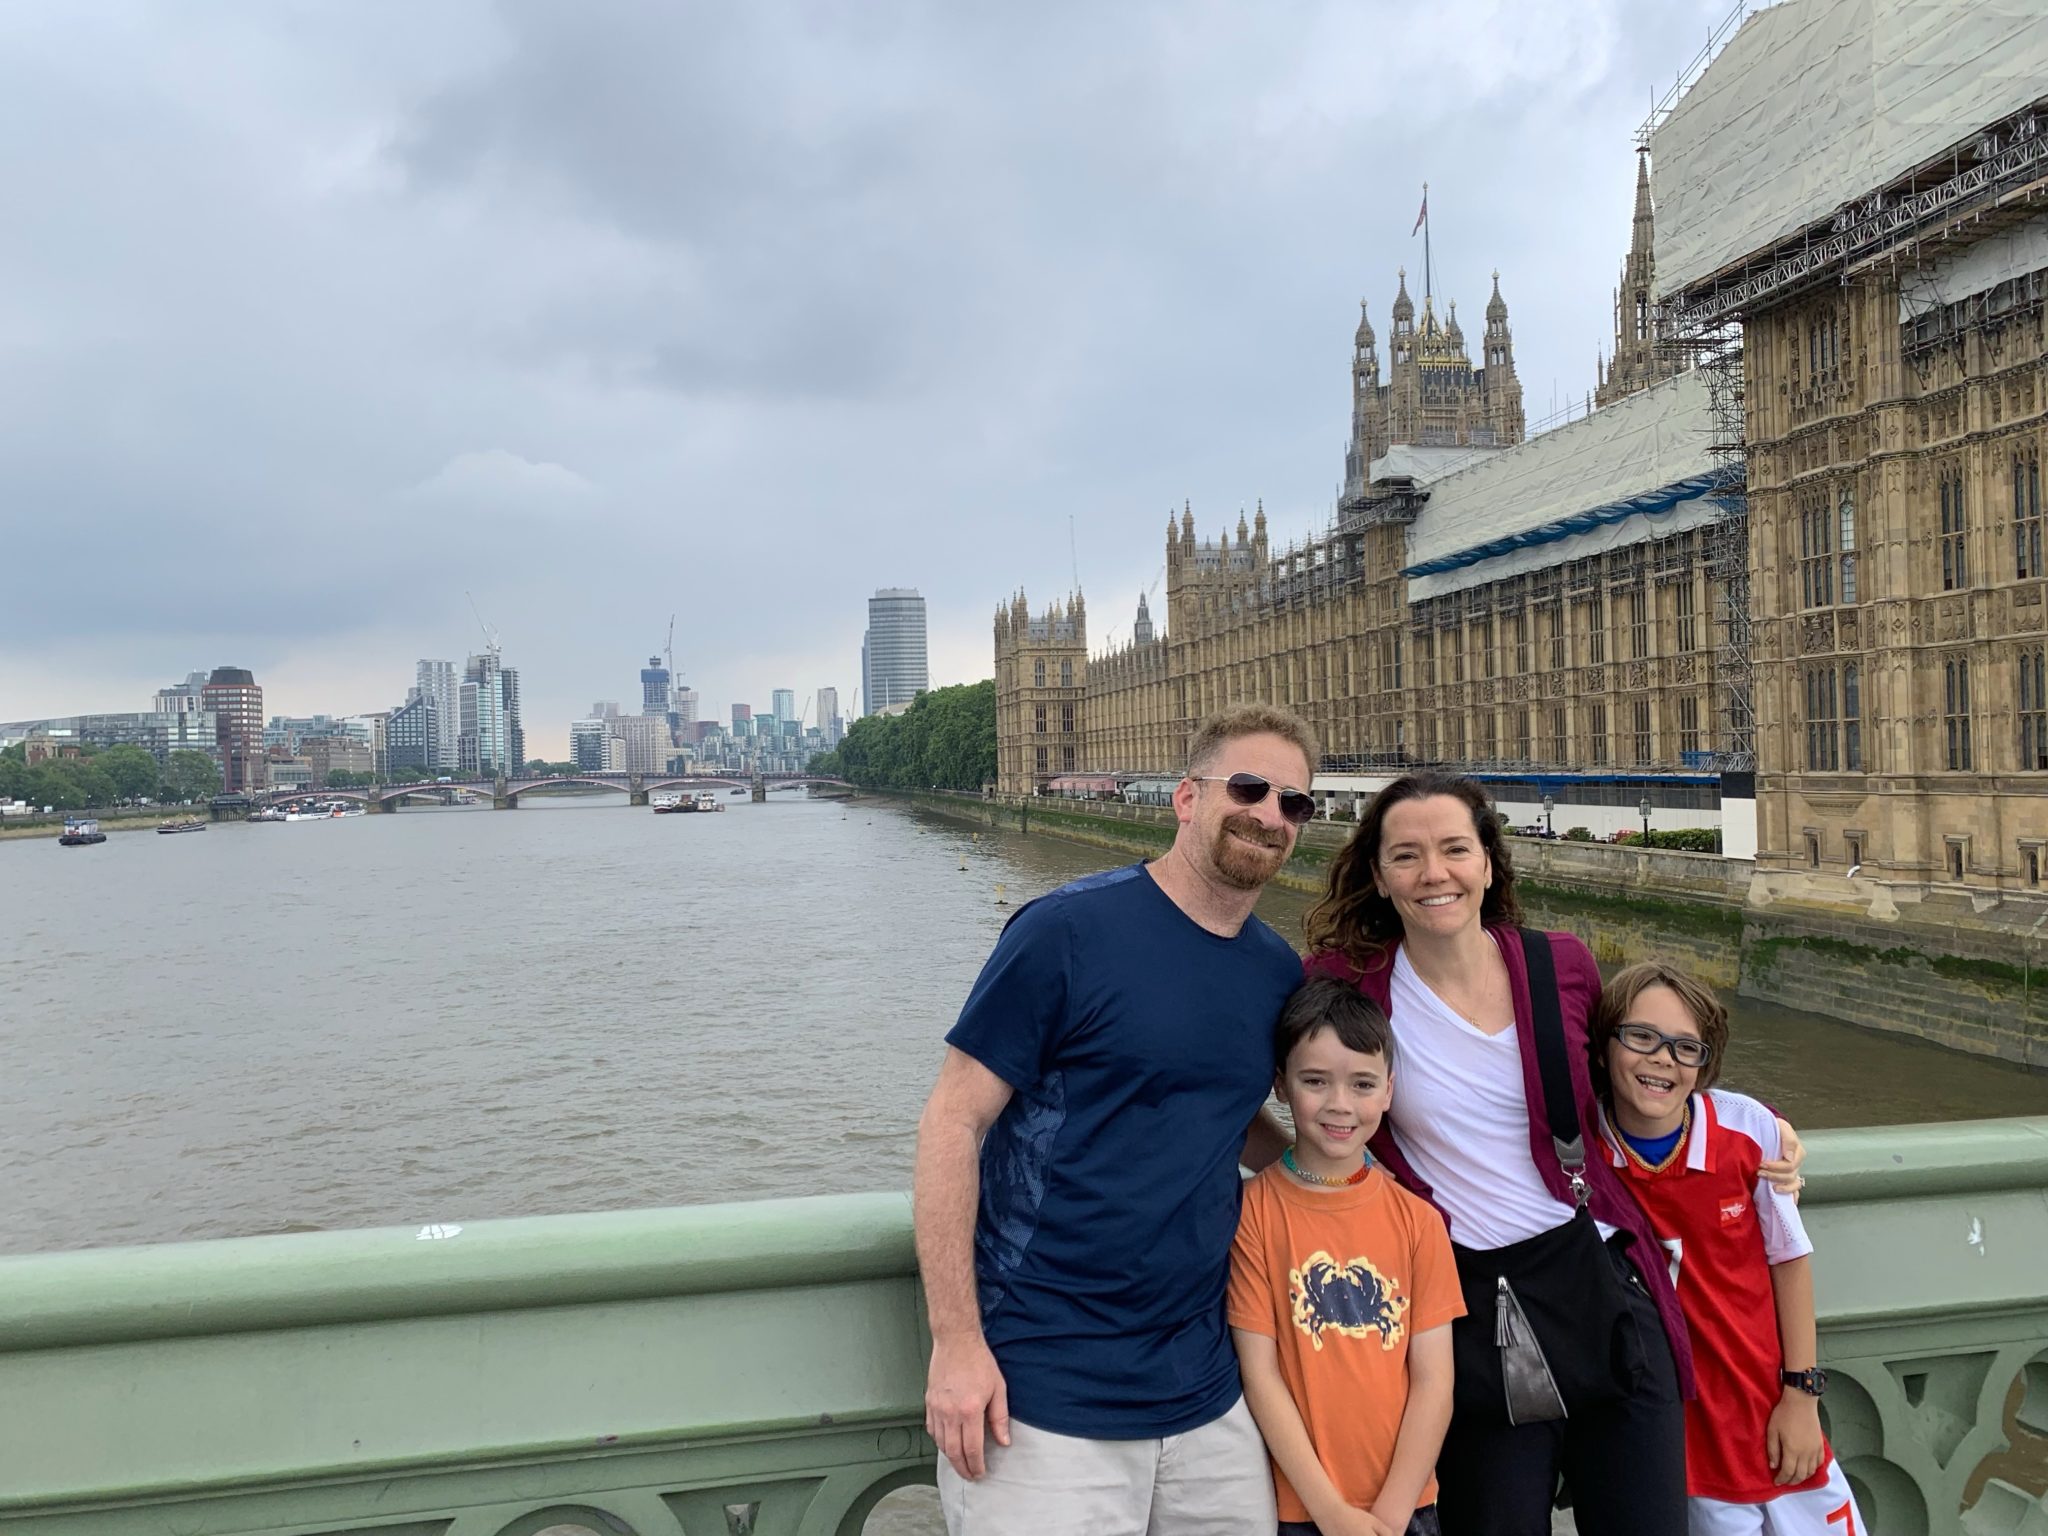 Things to do in London with kids